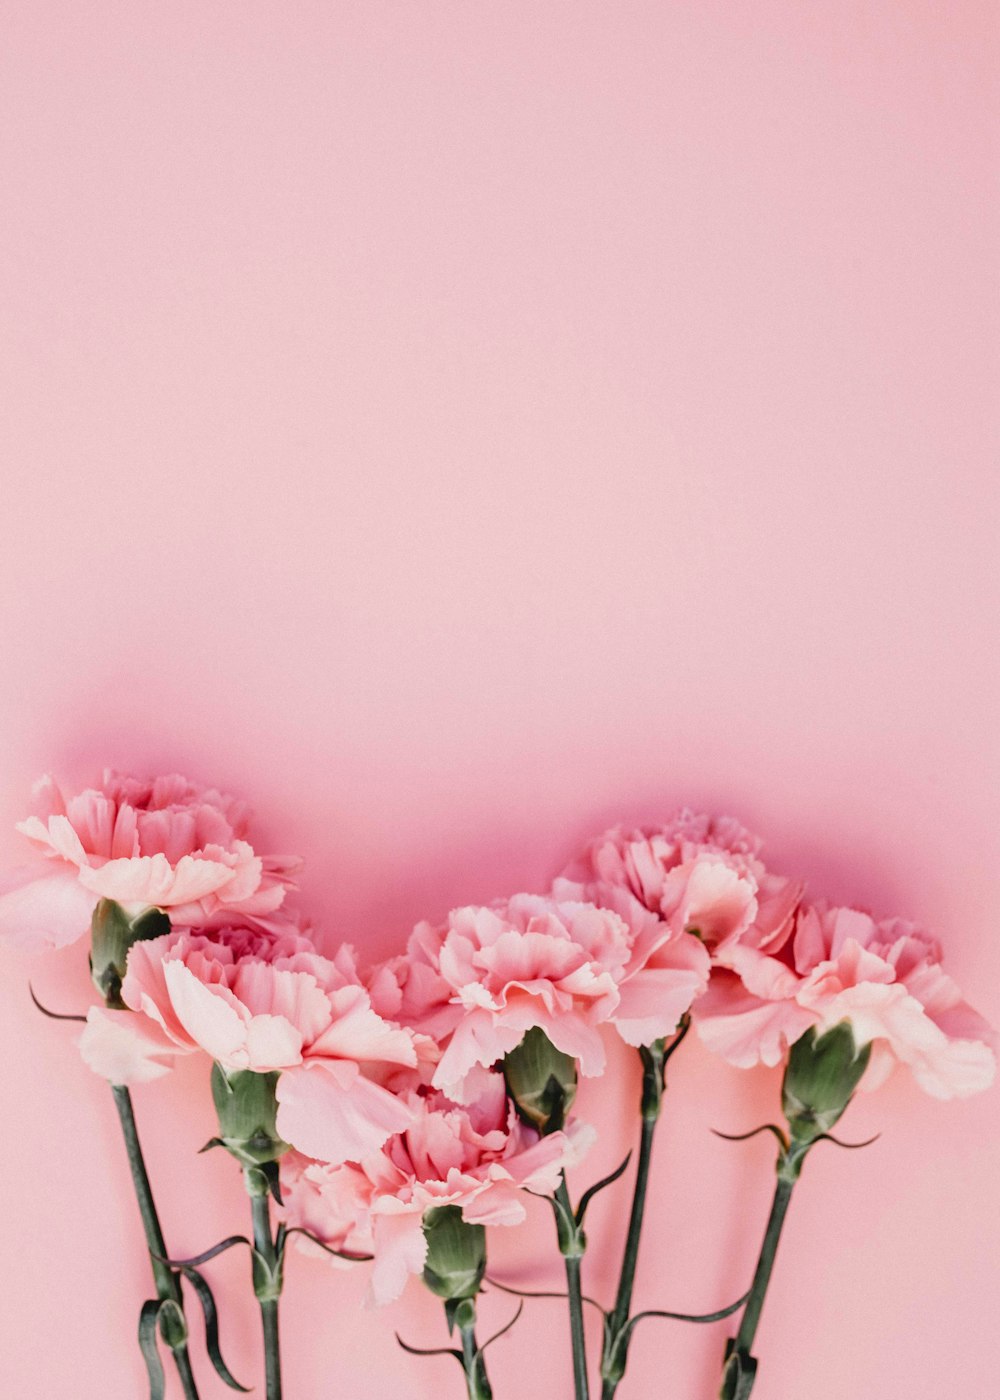 Pink flowers with pink background.